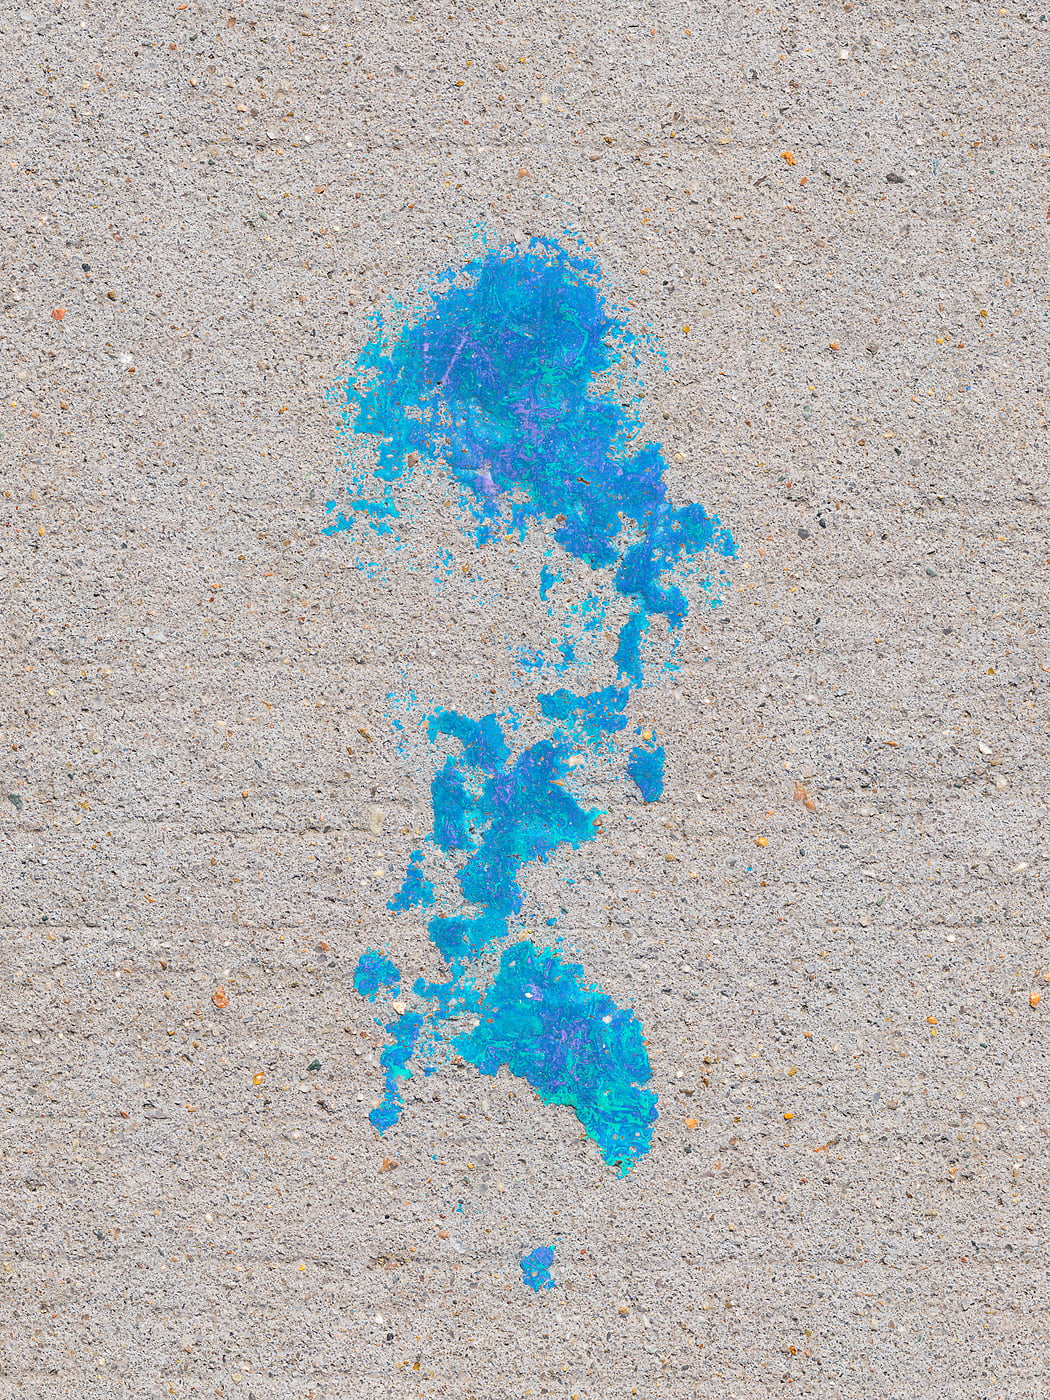 264 megapixels! A very high resolution, large-format VAST photo print of paint on the New York City sidewalk; abstract photograph created by Dan Piech in Manhattan, New York City